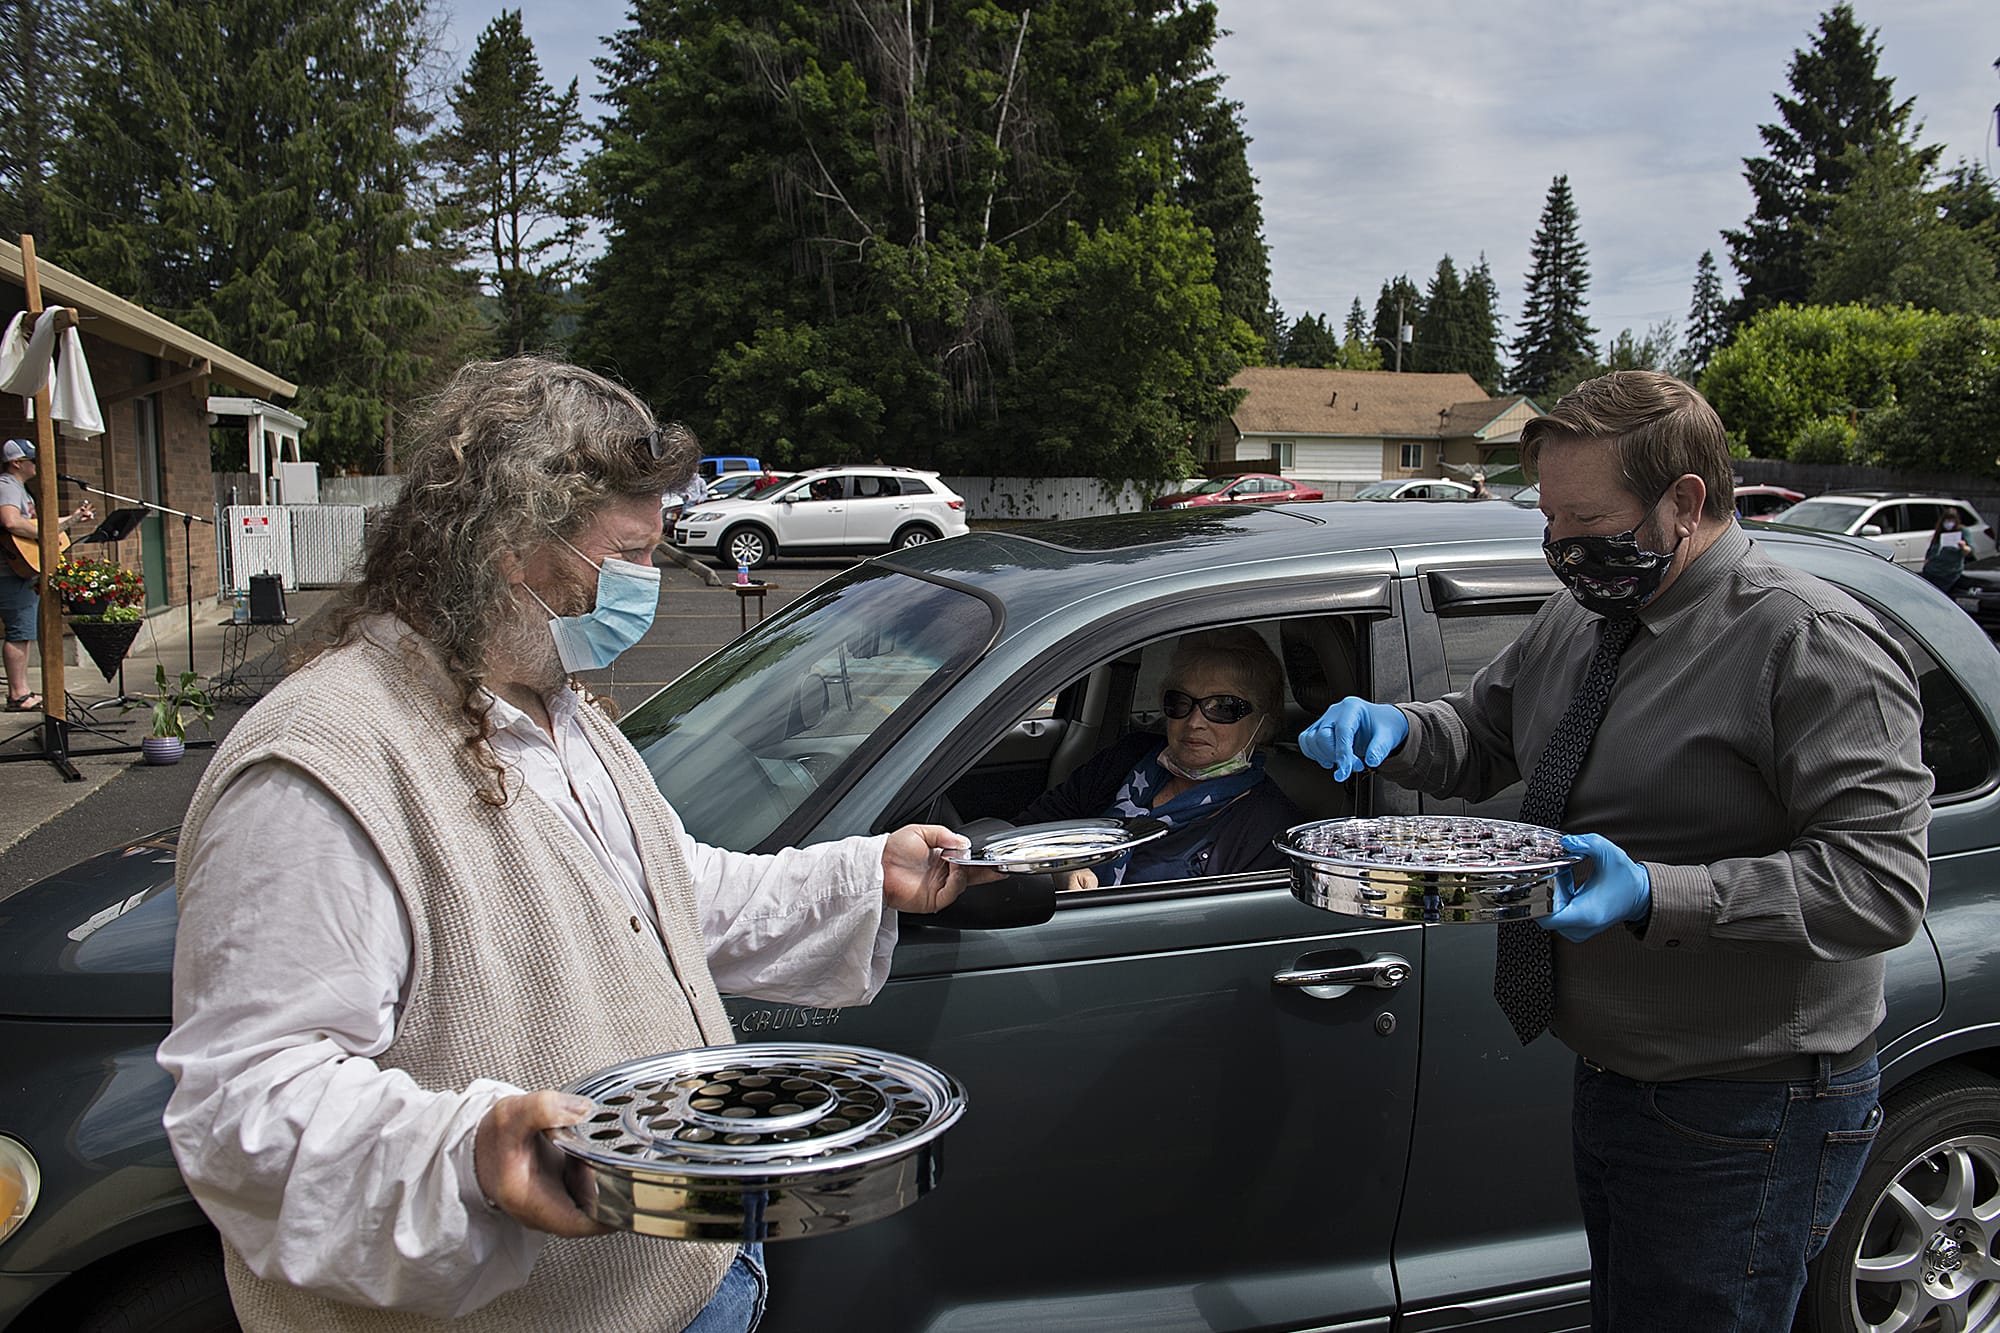 Charlie Raetz, left, a longtime member of St. Matthew Lutheran Church in Washougal, offers communion to Camas resident Tanya Fritz with the help of Pastor Robert Barber on Sunday morning, May 24, 2020. St. Matthew Lutheran Church, a small church in Washougal, offered its first drive-in church service that also included music, a message and cookies to-go for those in attendance.